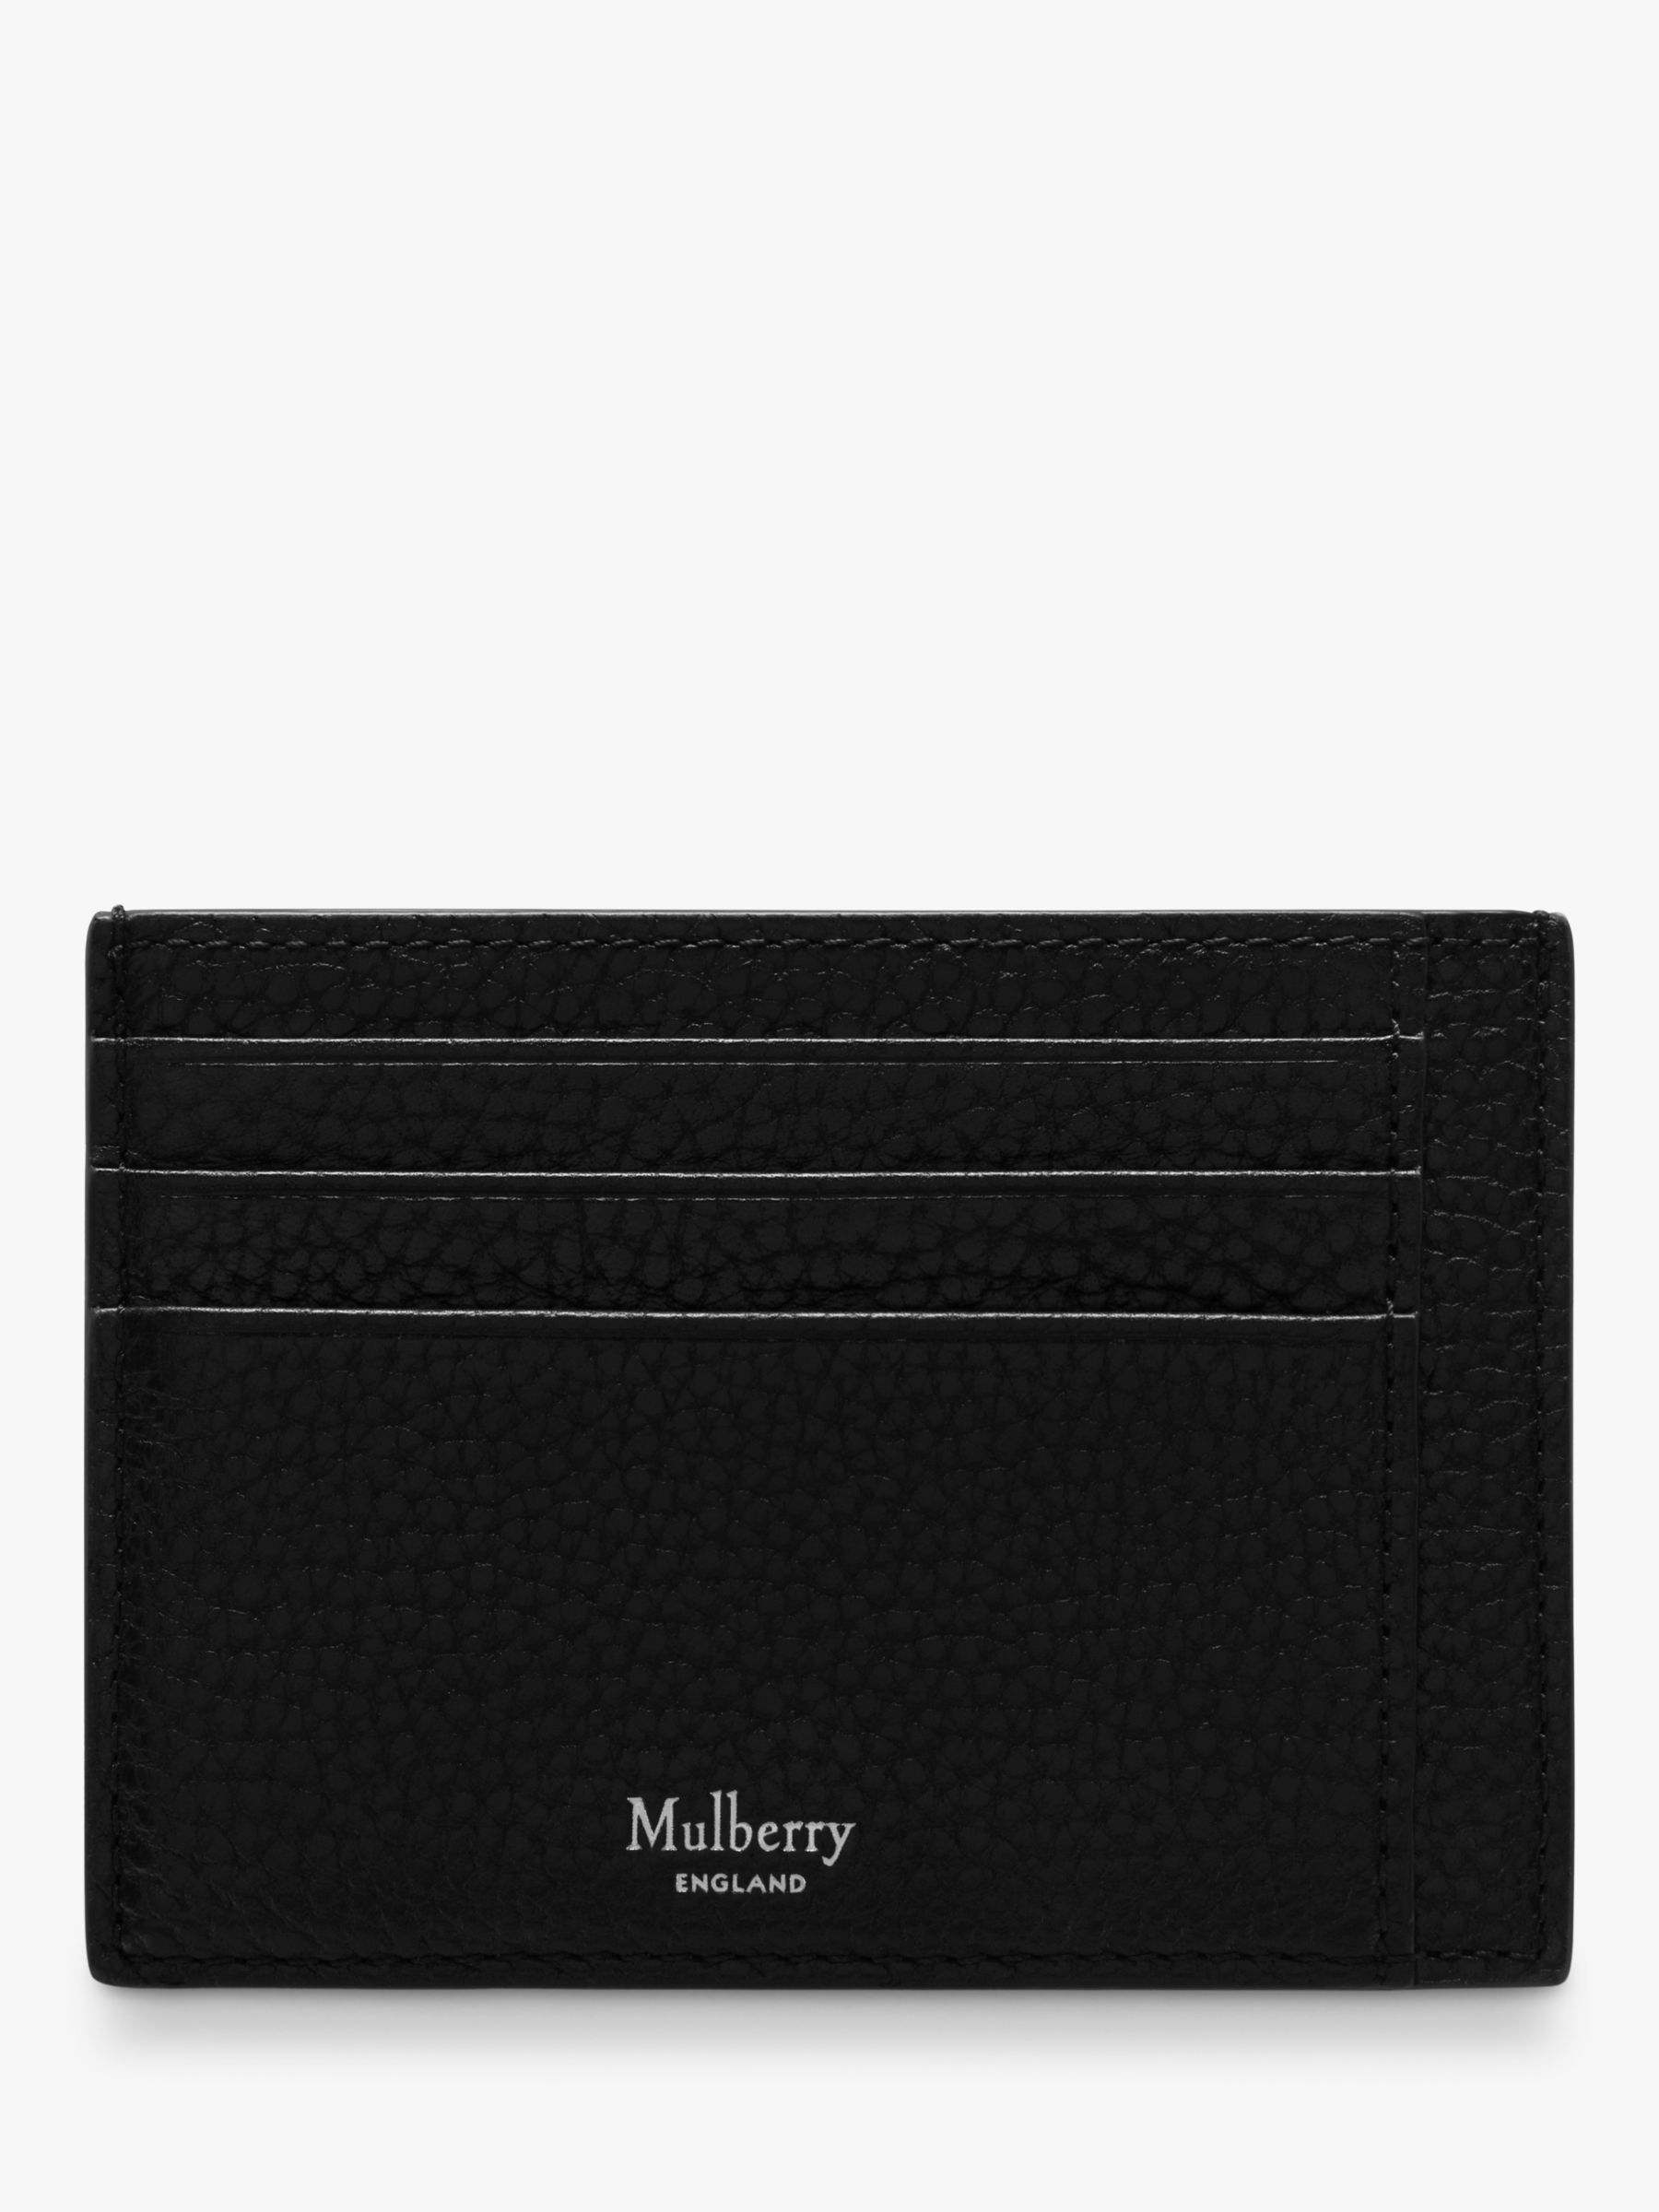 Mulberry Small Classic Grain Leather Card Holder, Black